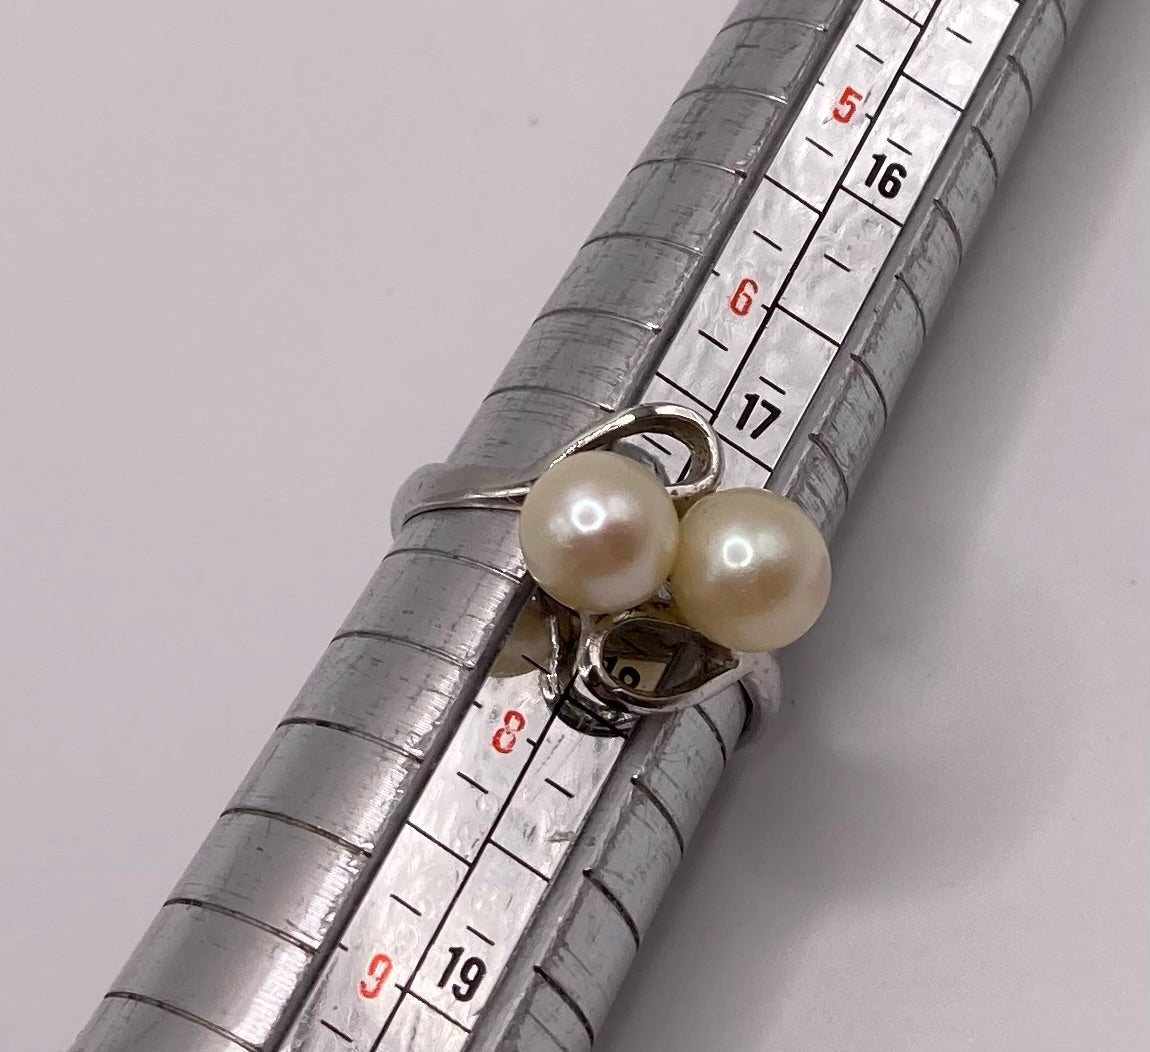 Silver Faux Pearl Bypass Ring Sz 7